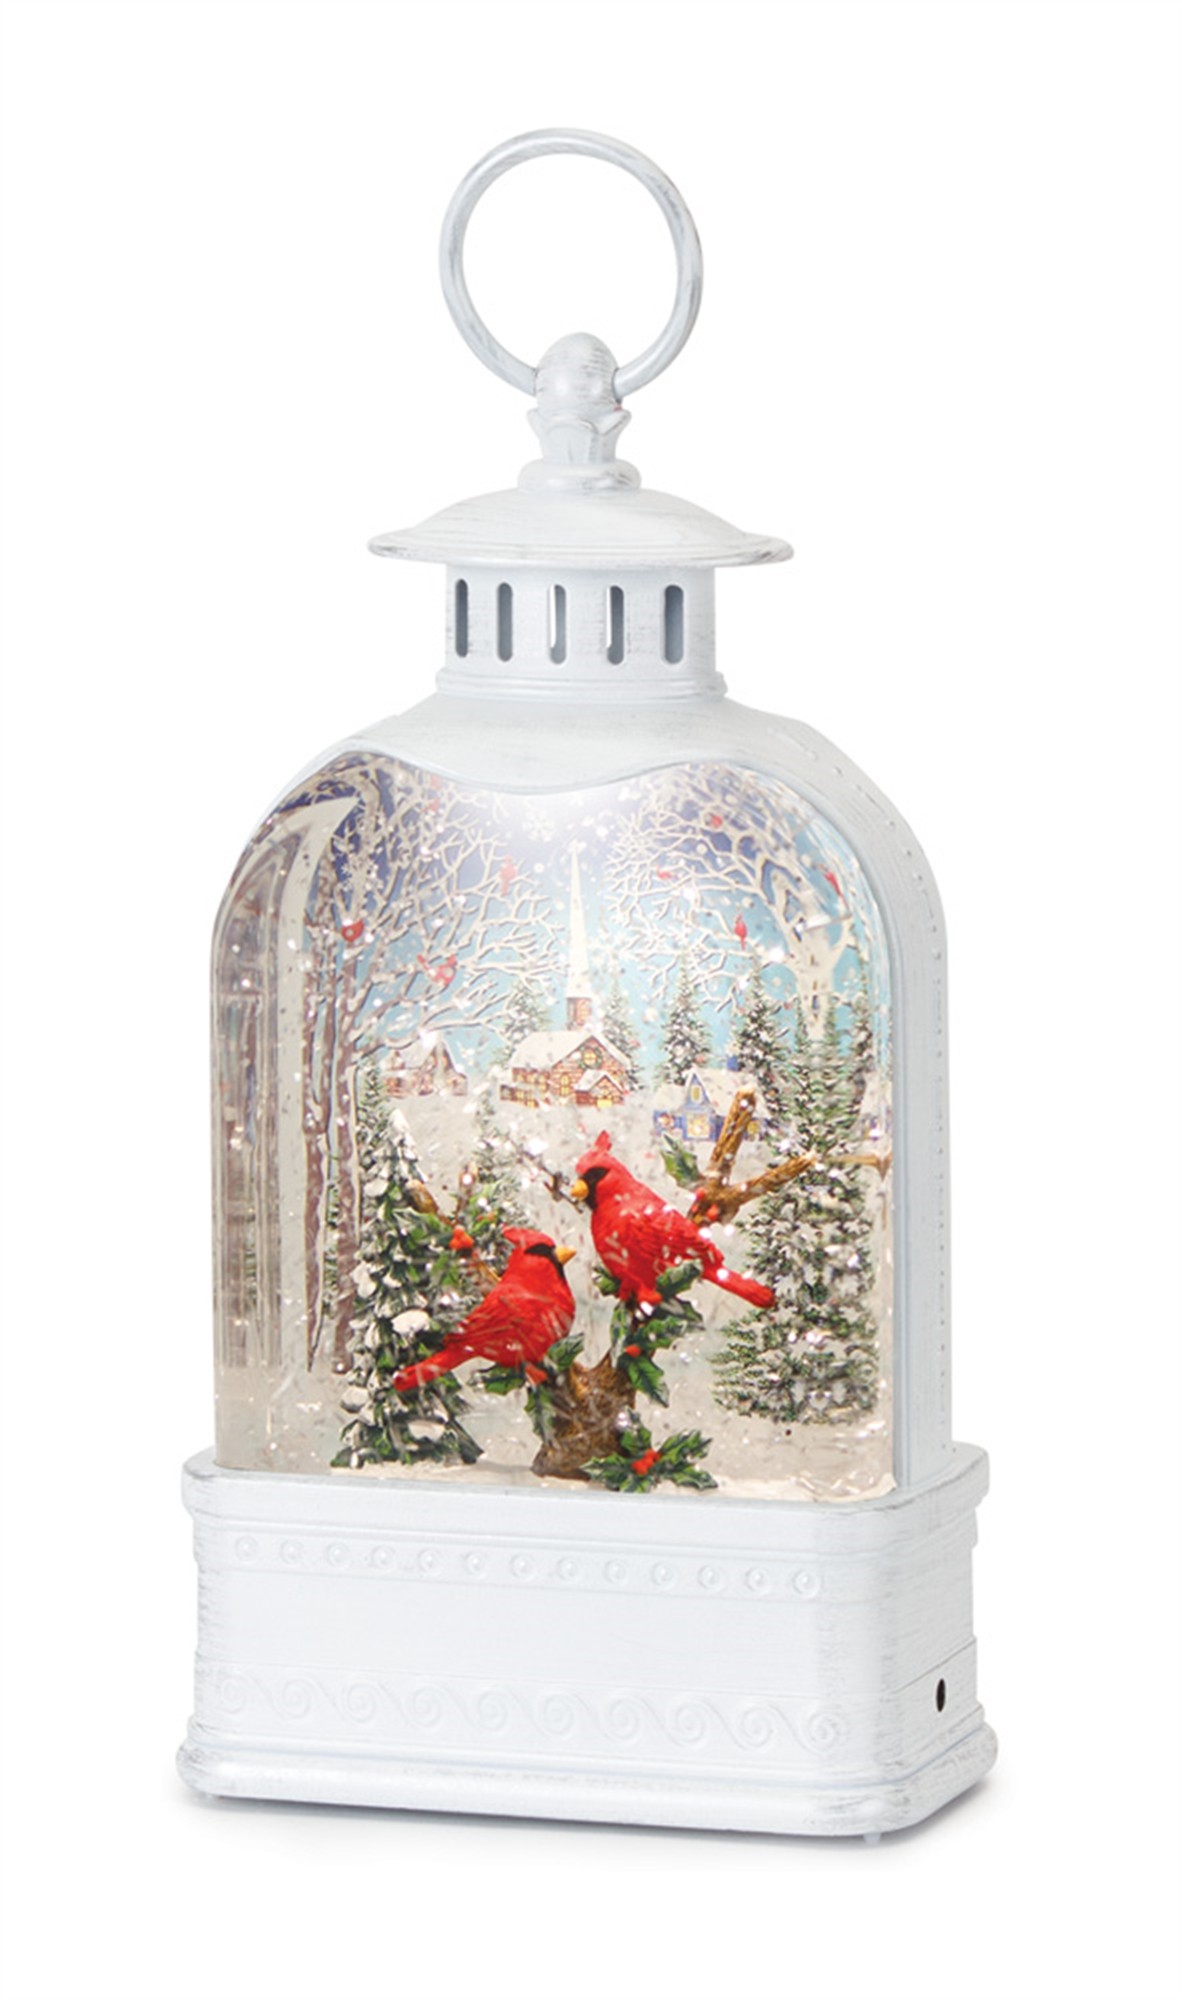 Snow Globe Lantern w/Santa 10.5"H Plastic 6 Hr Timer 3 AA Batteries, Not Included or USB Cord included